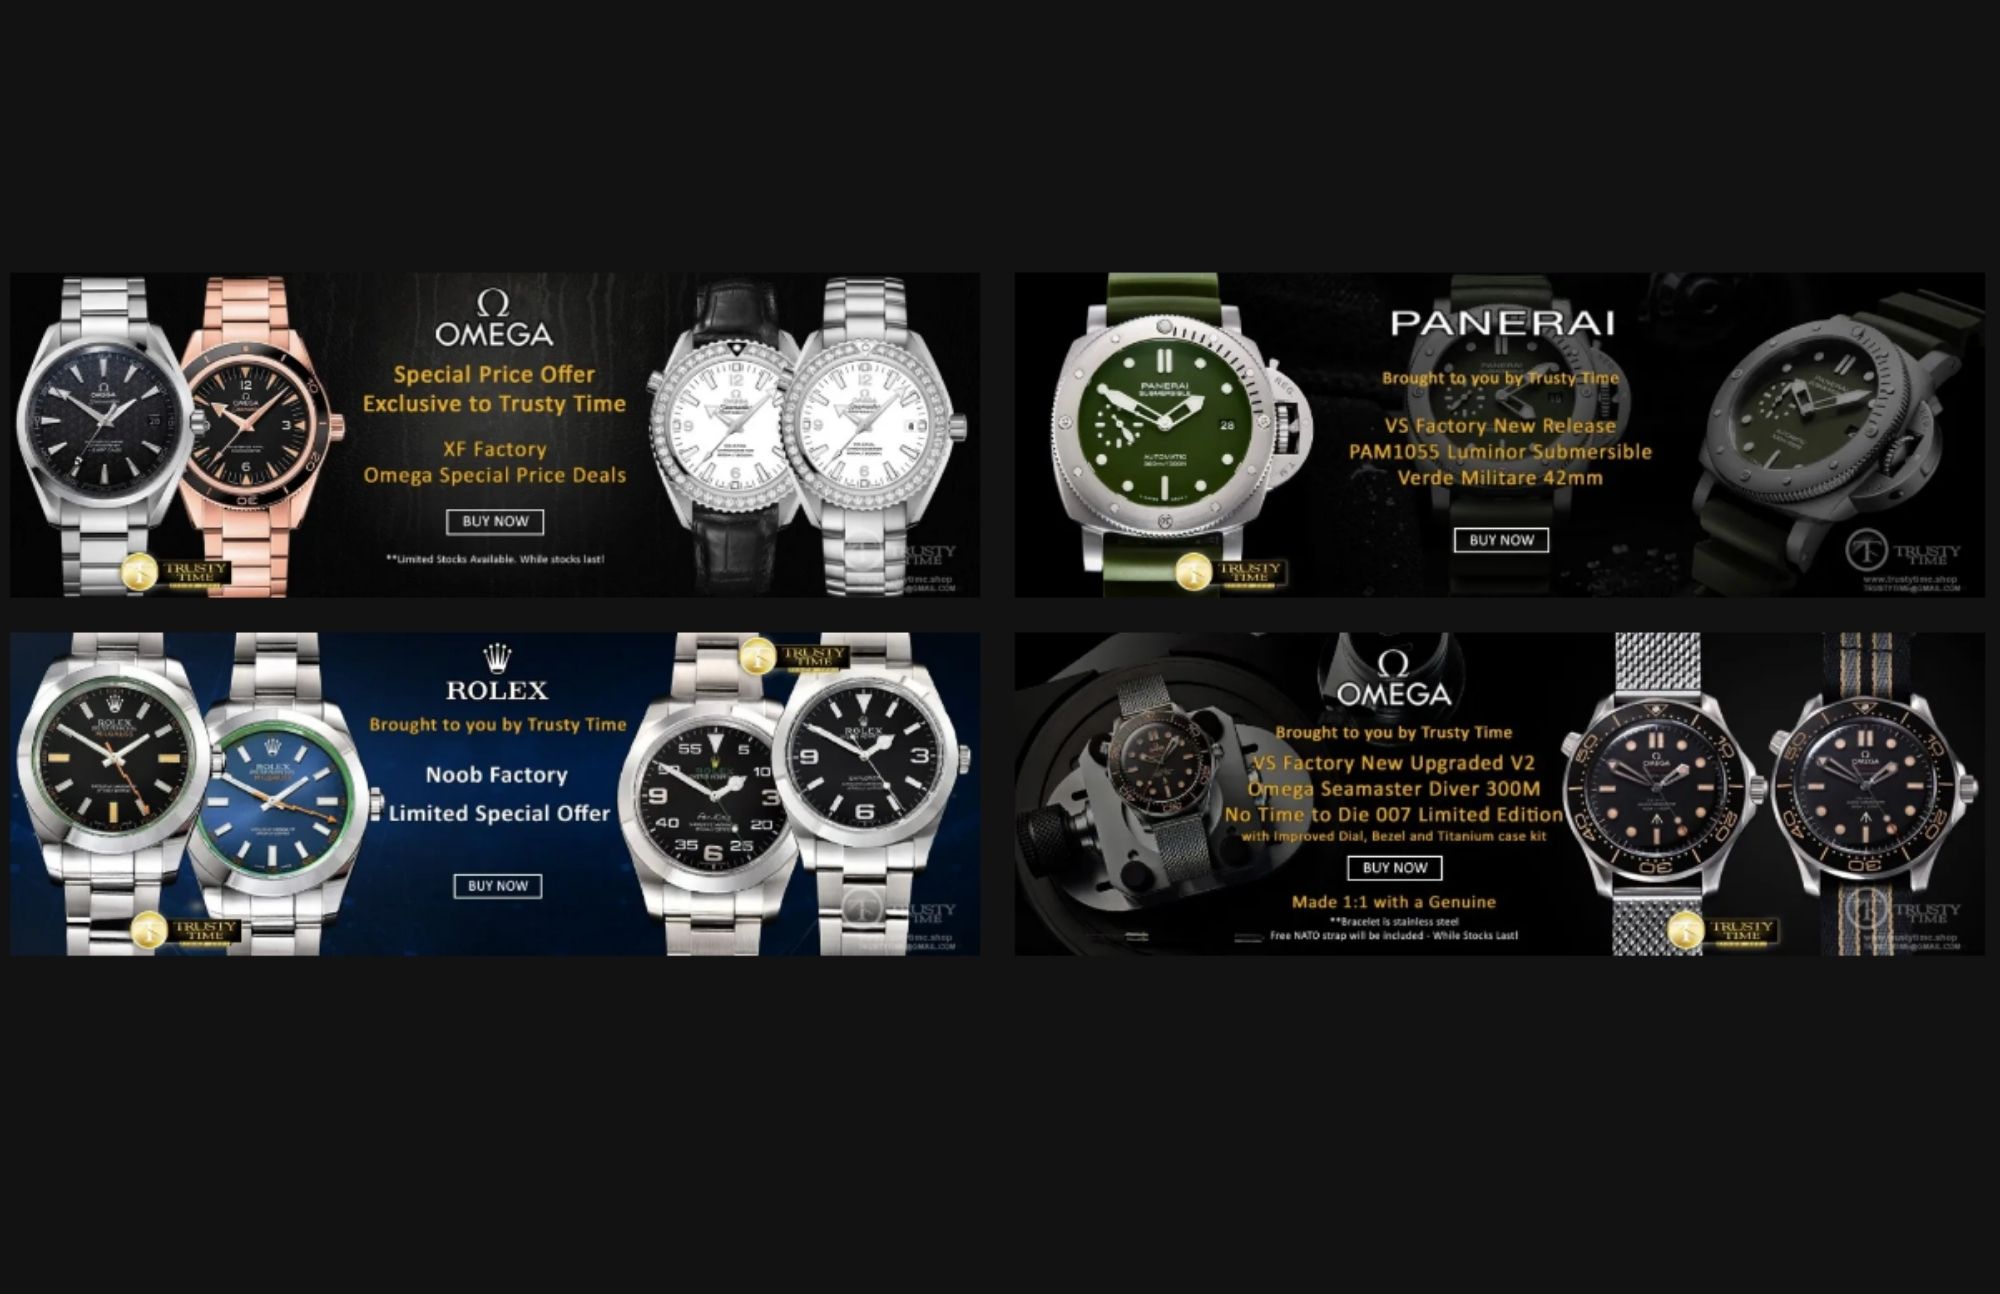 Various well-known watch brands such as Omega, Panerai, Rolex, and TrustyTime's upgraded Omega brand